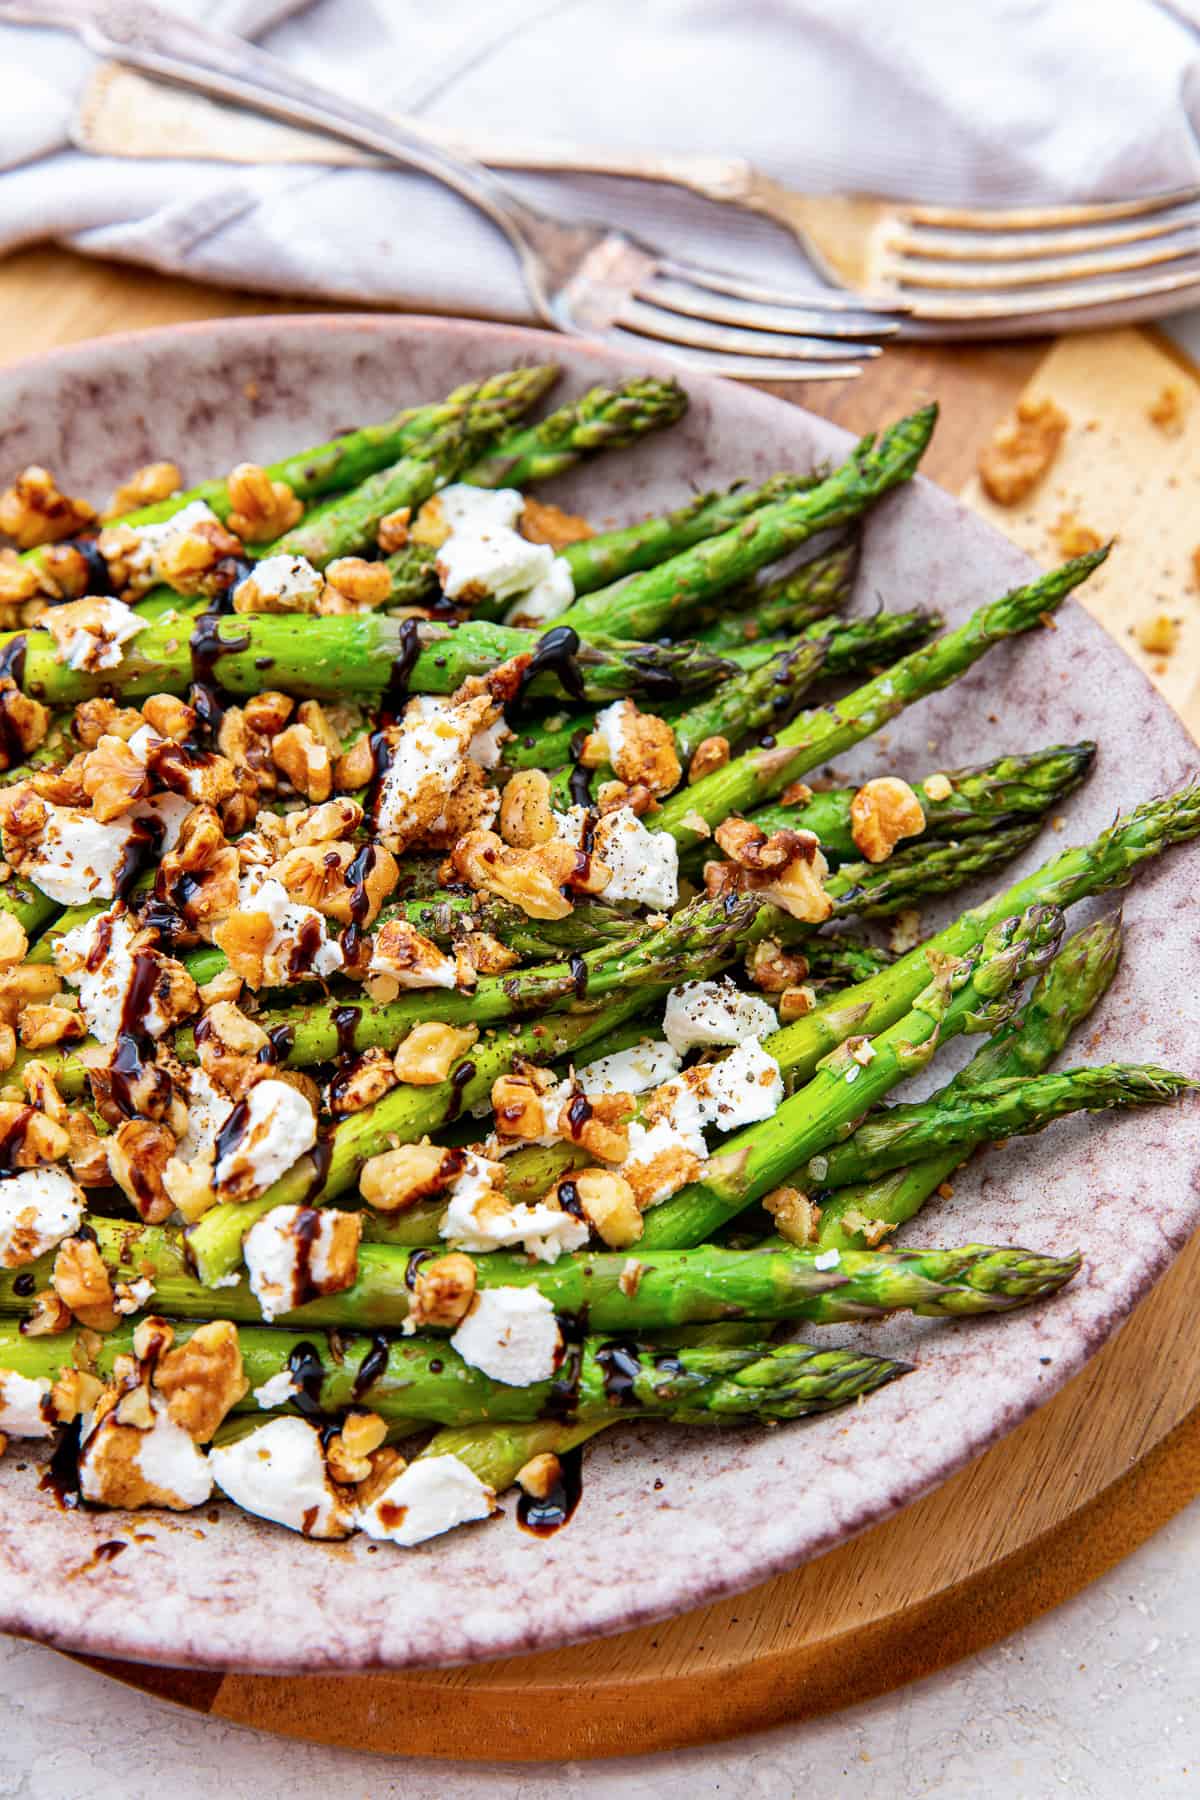 Asparagus with goat cheese and balsamic glaze on a pink plate.